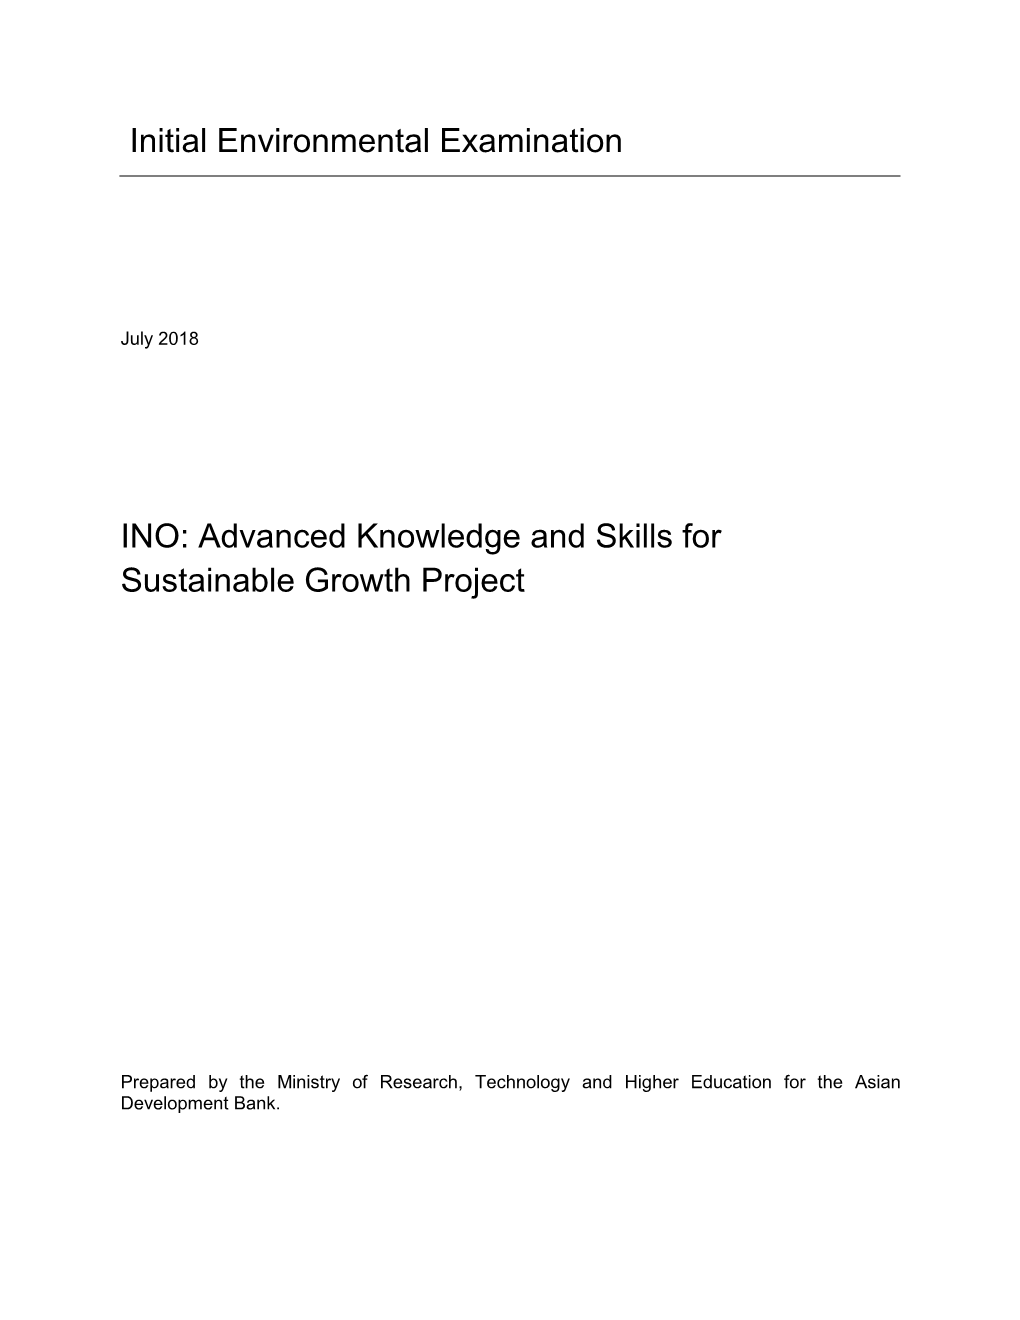 50395-006: Advanced Knowledge and Skills for Sustainable Growth Project